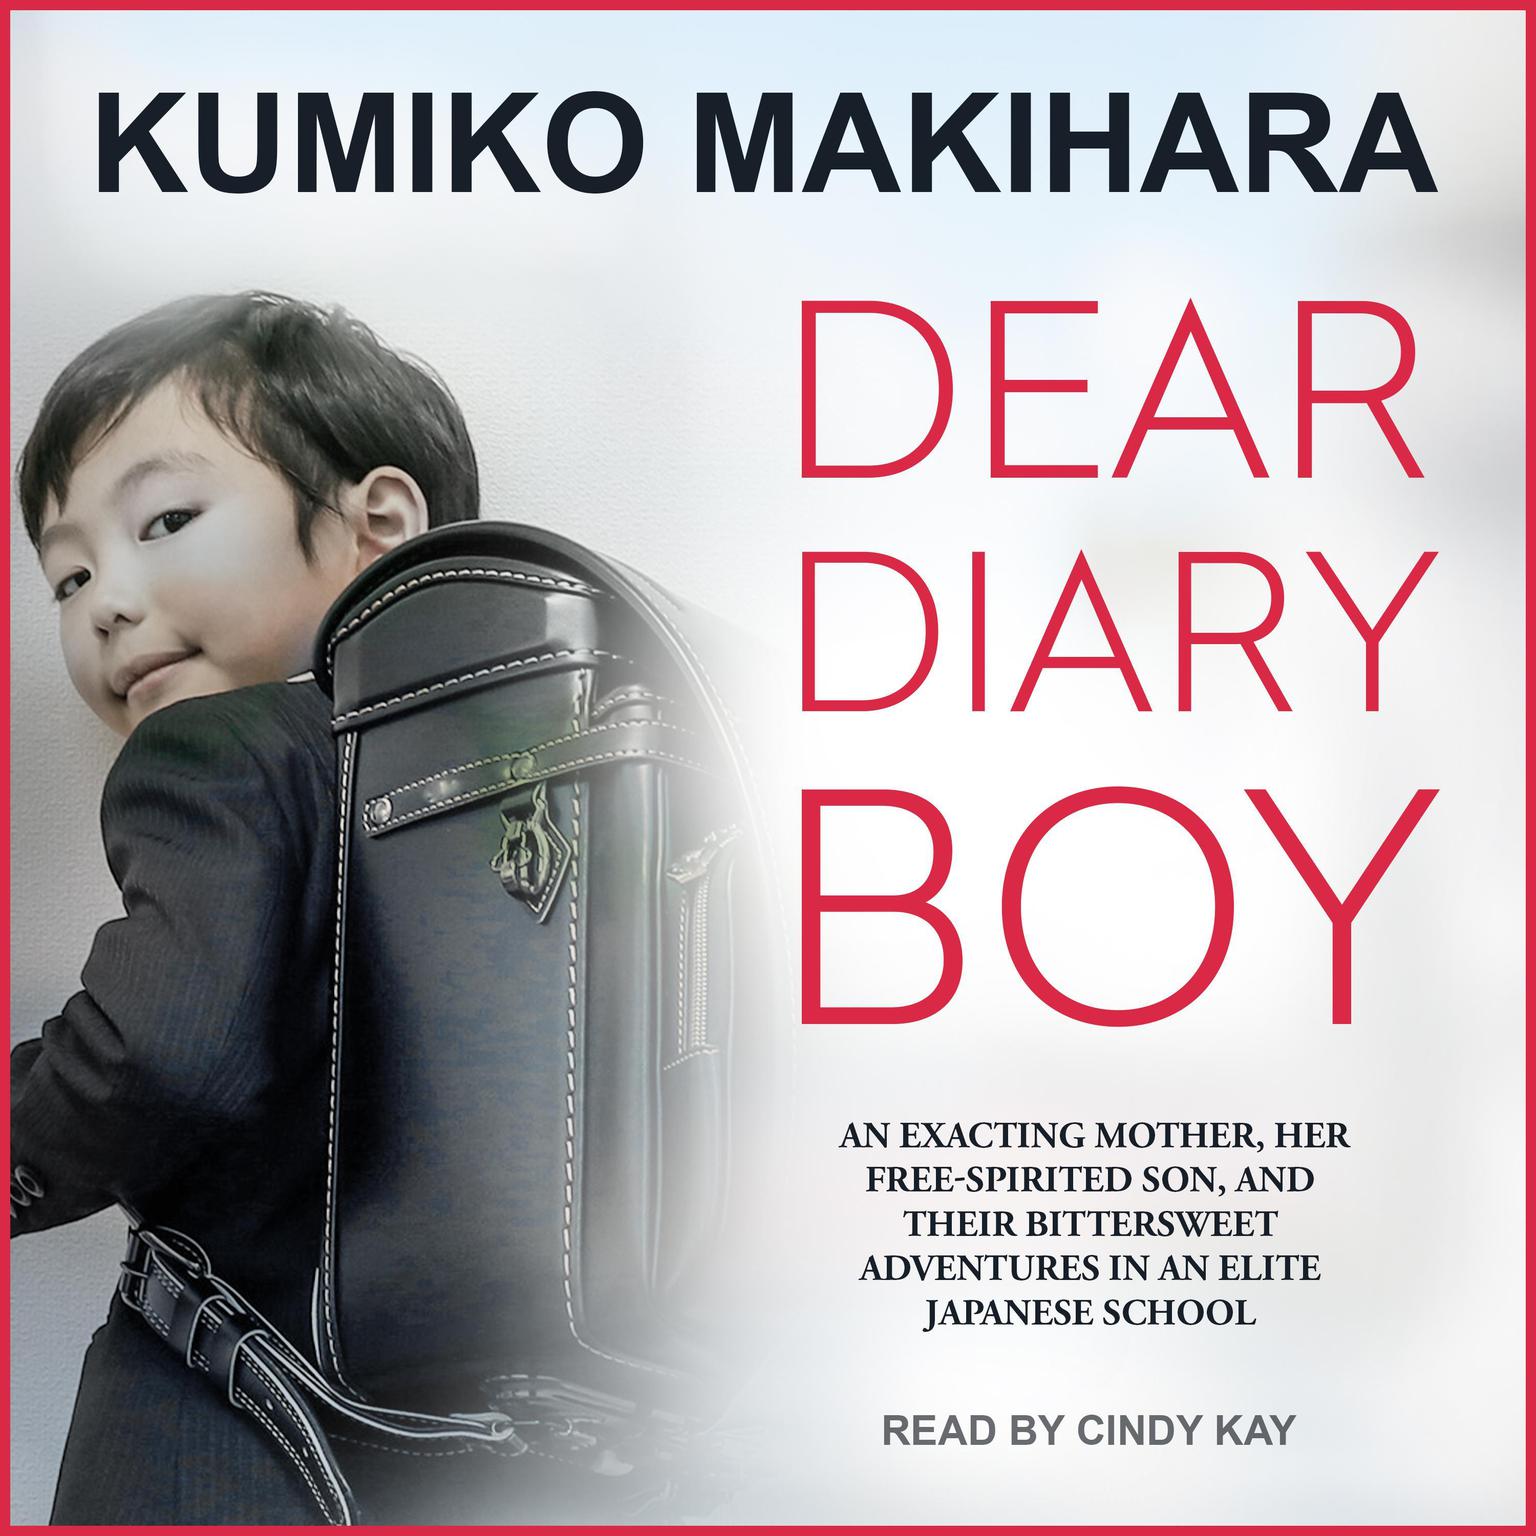 Dear Diary Boy: An Exacting Mother, Her Free-Spirited Son, and Their Bittersweet Adventures in an Elite Japanese School Audiobook, by Kumiko Makihara